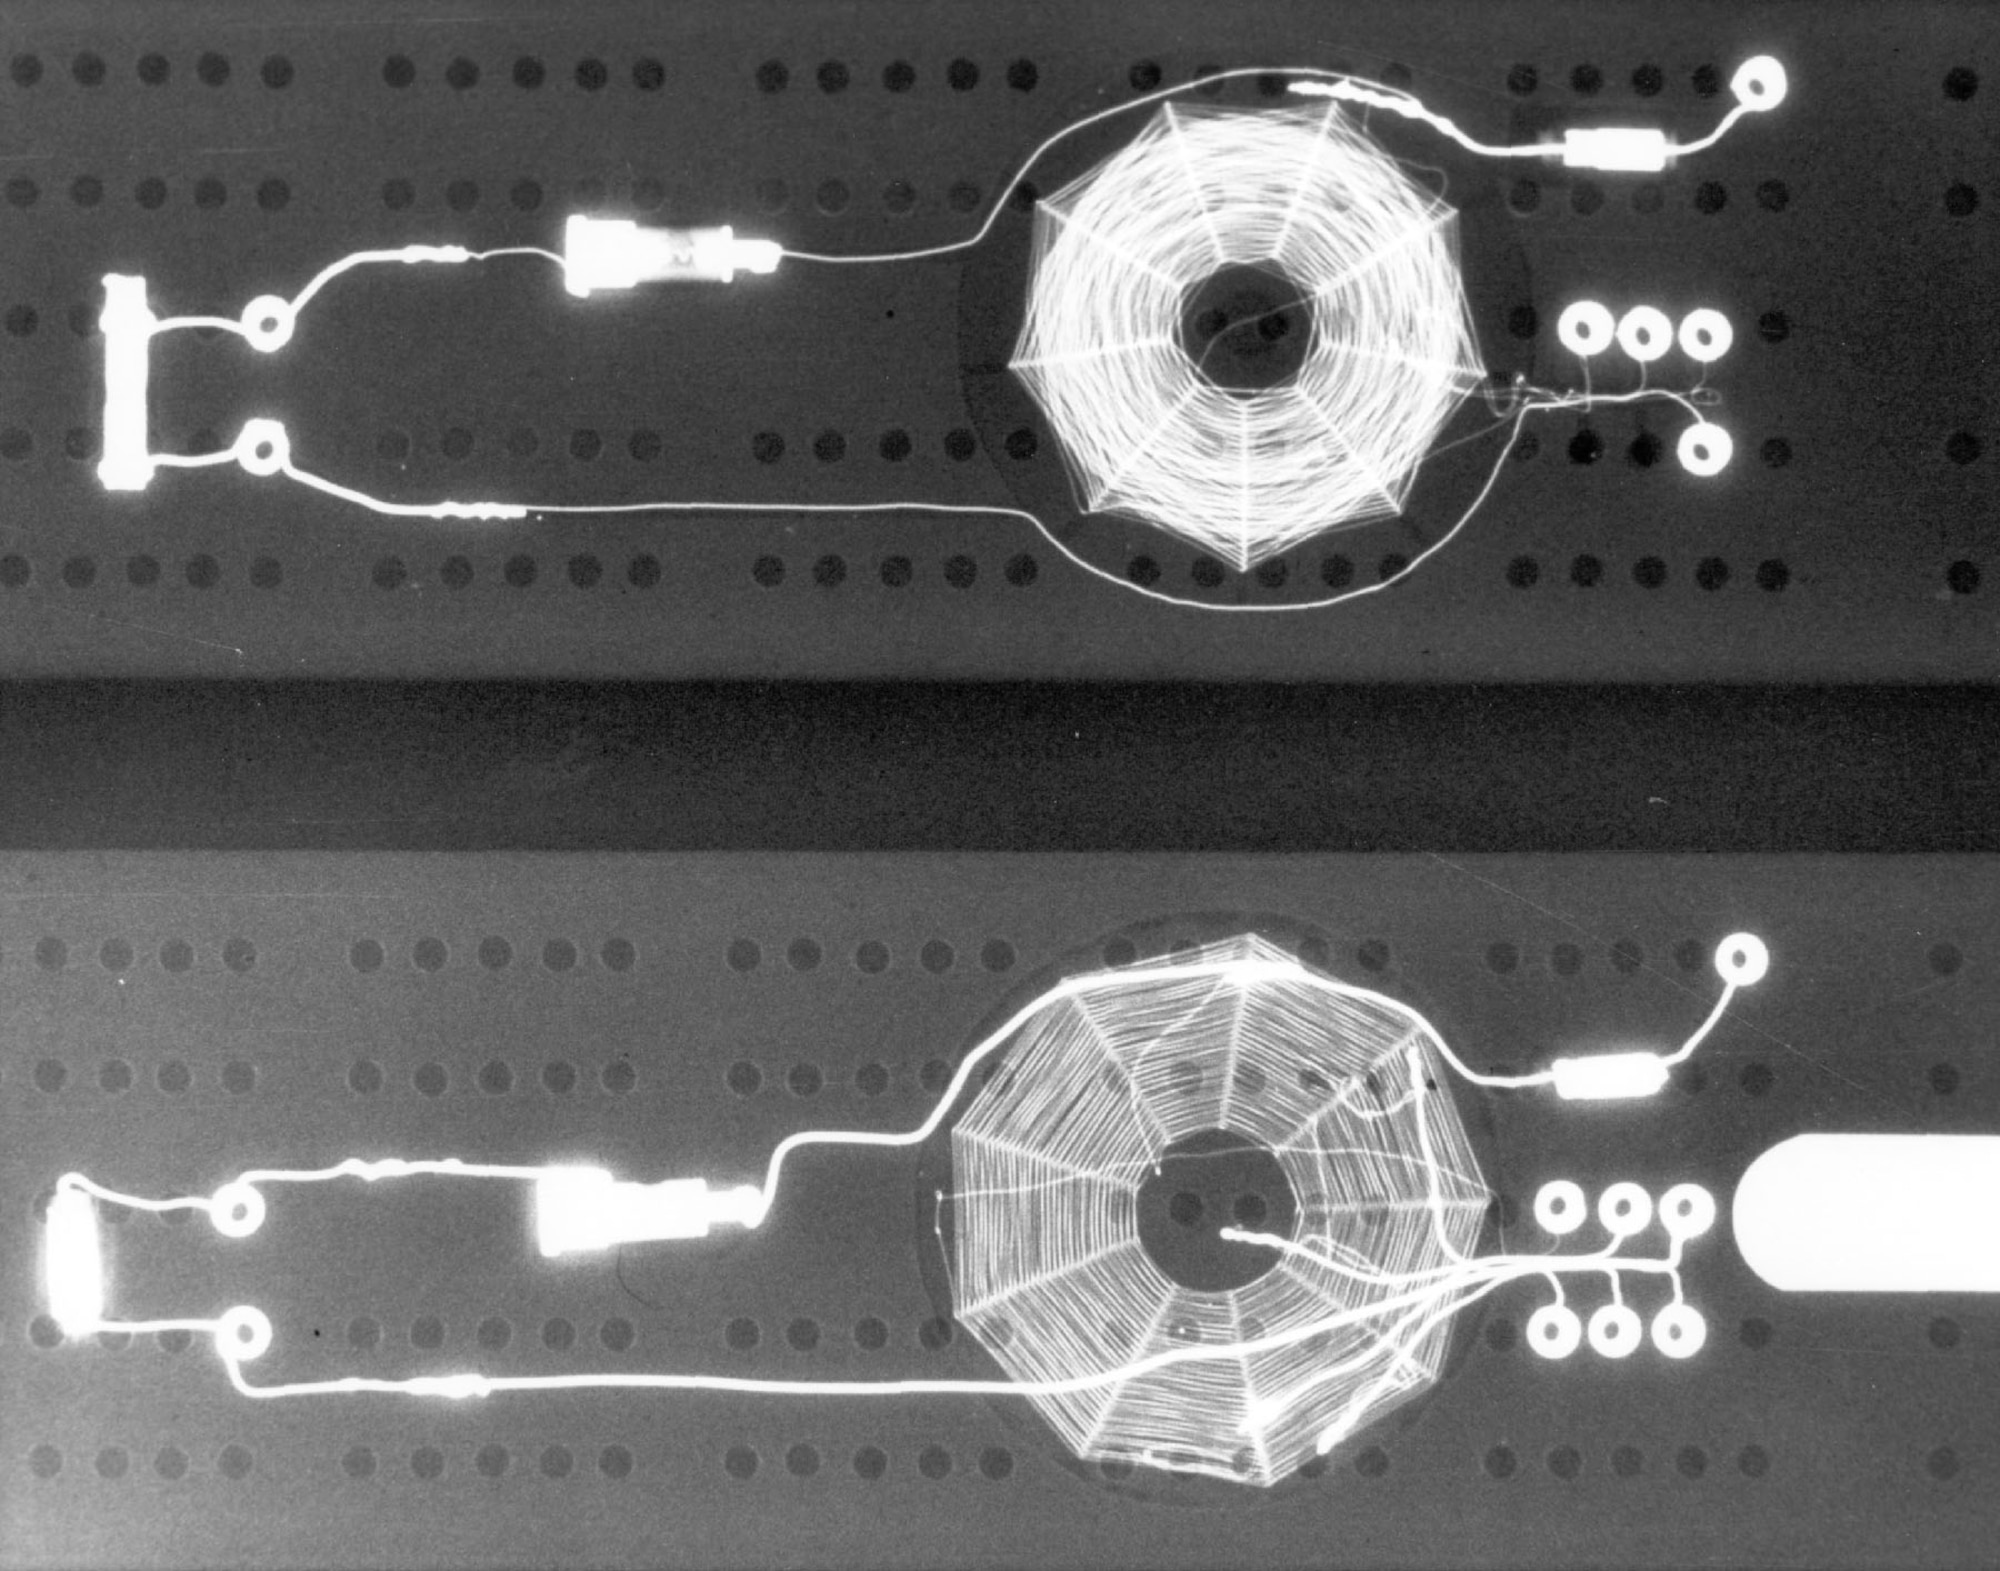 X-ray photograph of radio concealed in a cribbage board. (U.S. Air Force photo)